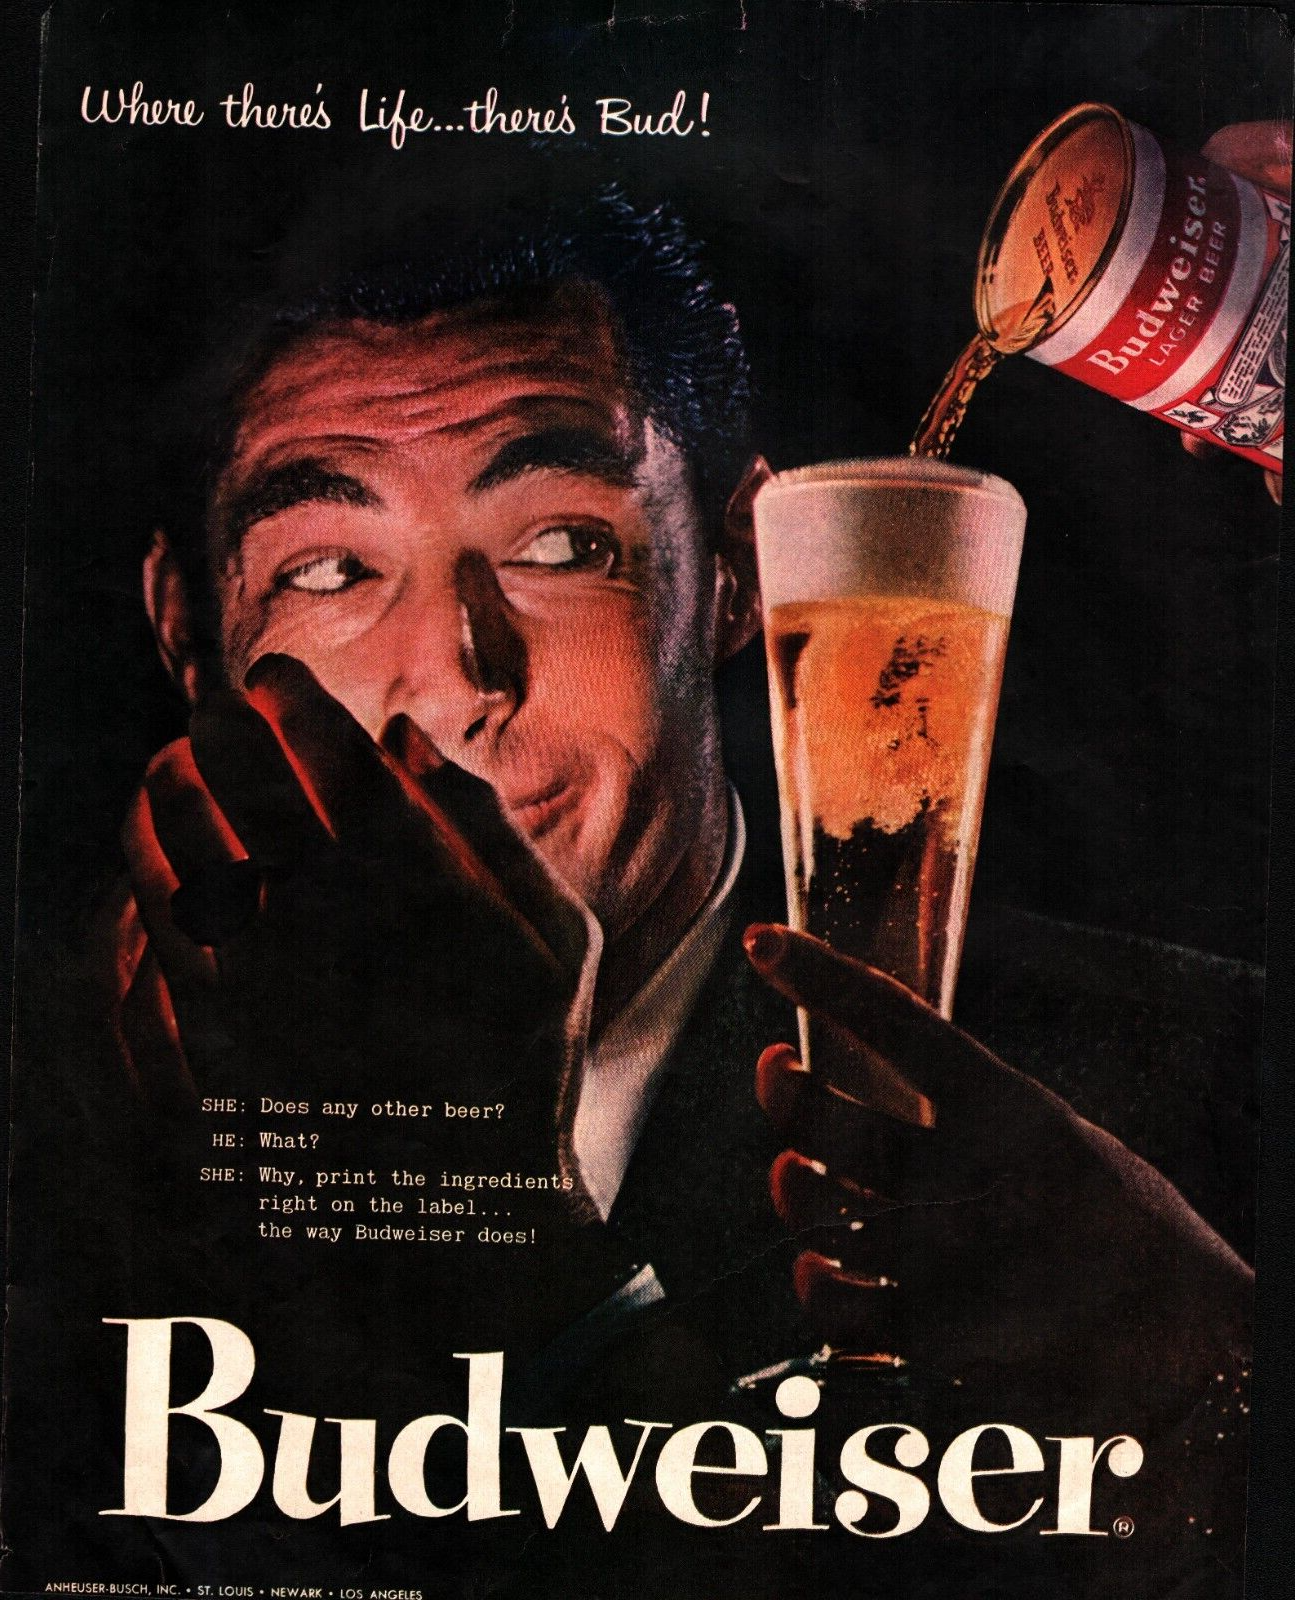 Budweiser Beer Vintage Magazine Print Ad 1957 Where There's Life There's Bud a2 - $26.92